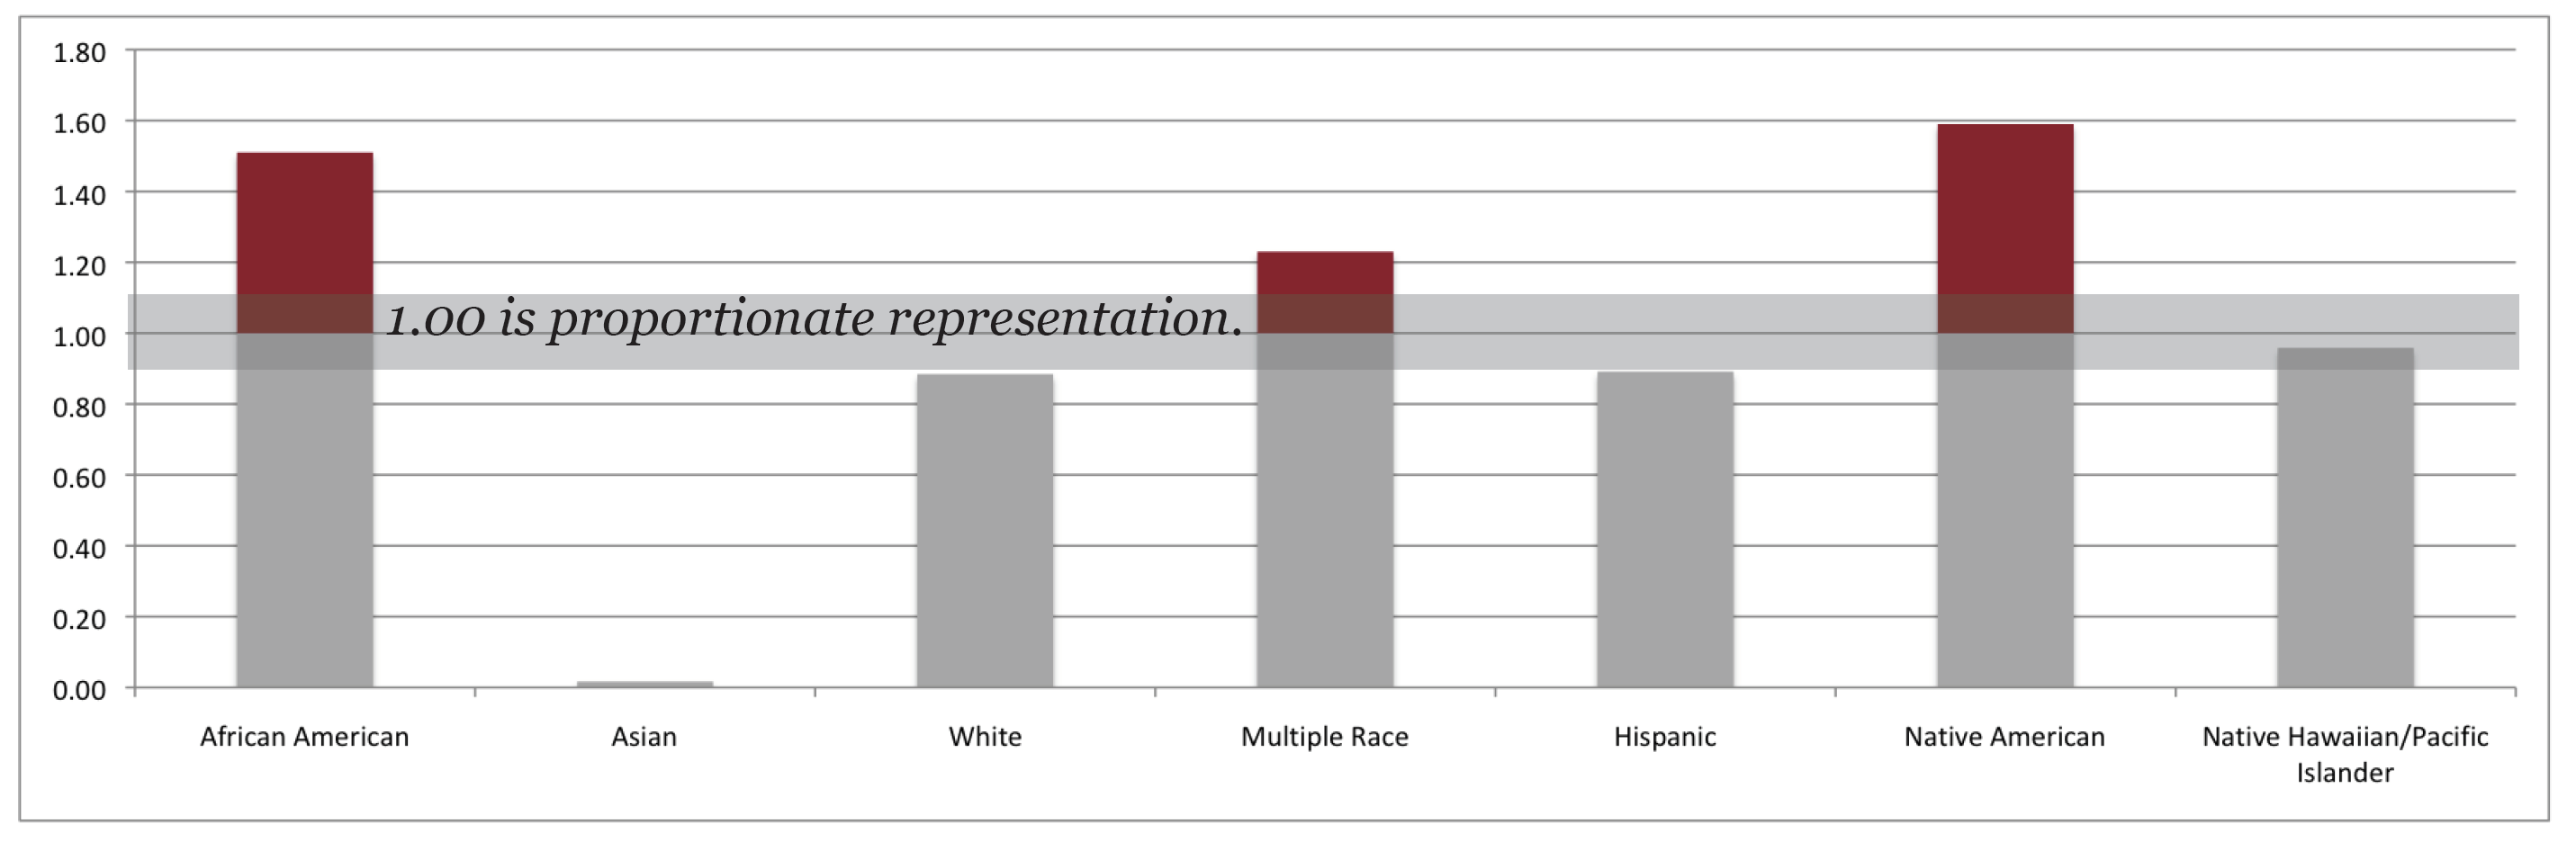 National Disproportionality Indices